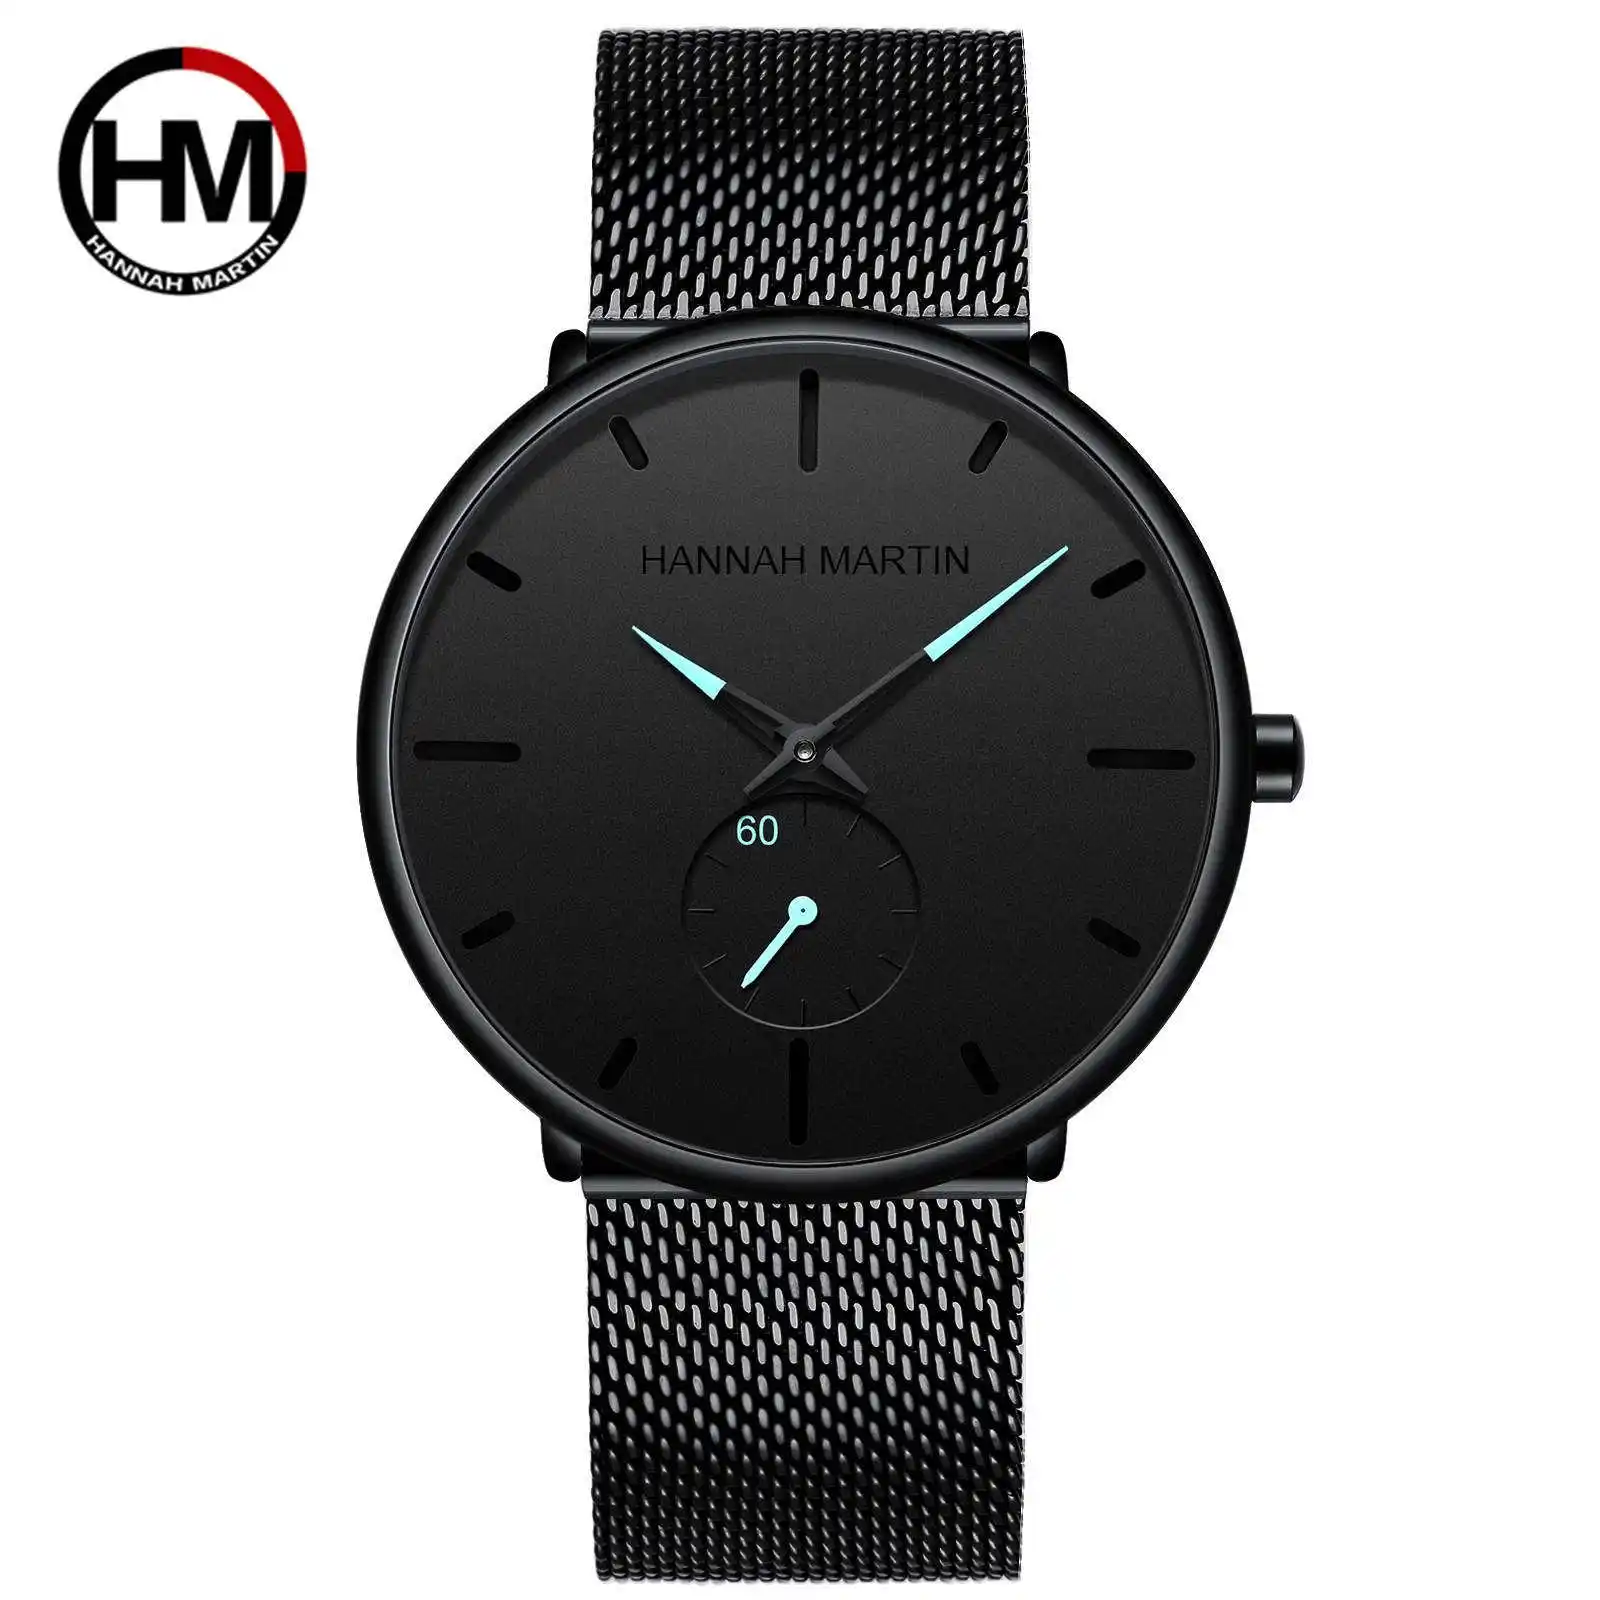 Hannah Martin Mesh Men Watches for Men Mesh Band Fashion Unique Direct Wrist Man Watch Stainless Steel Simple Waterproof 100G